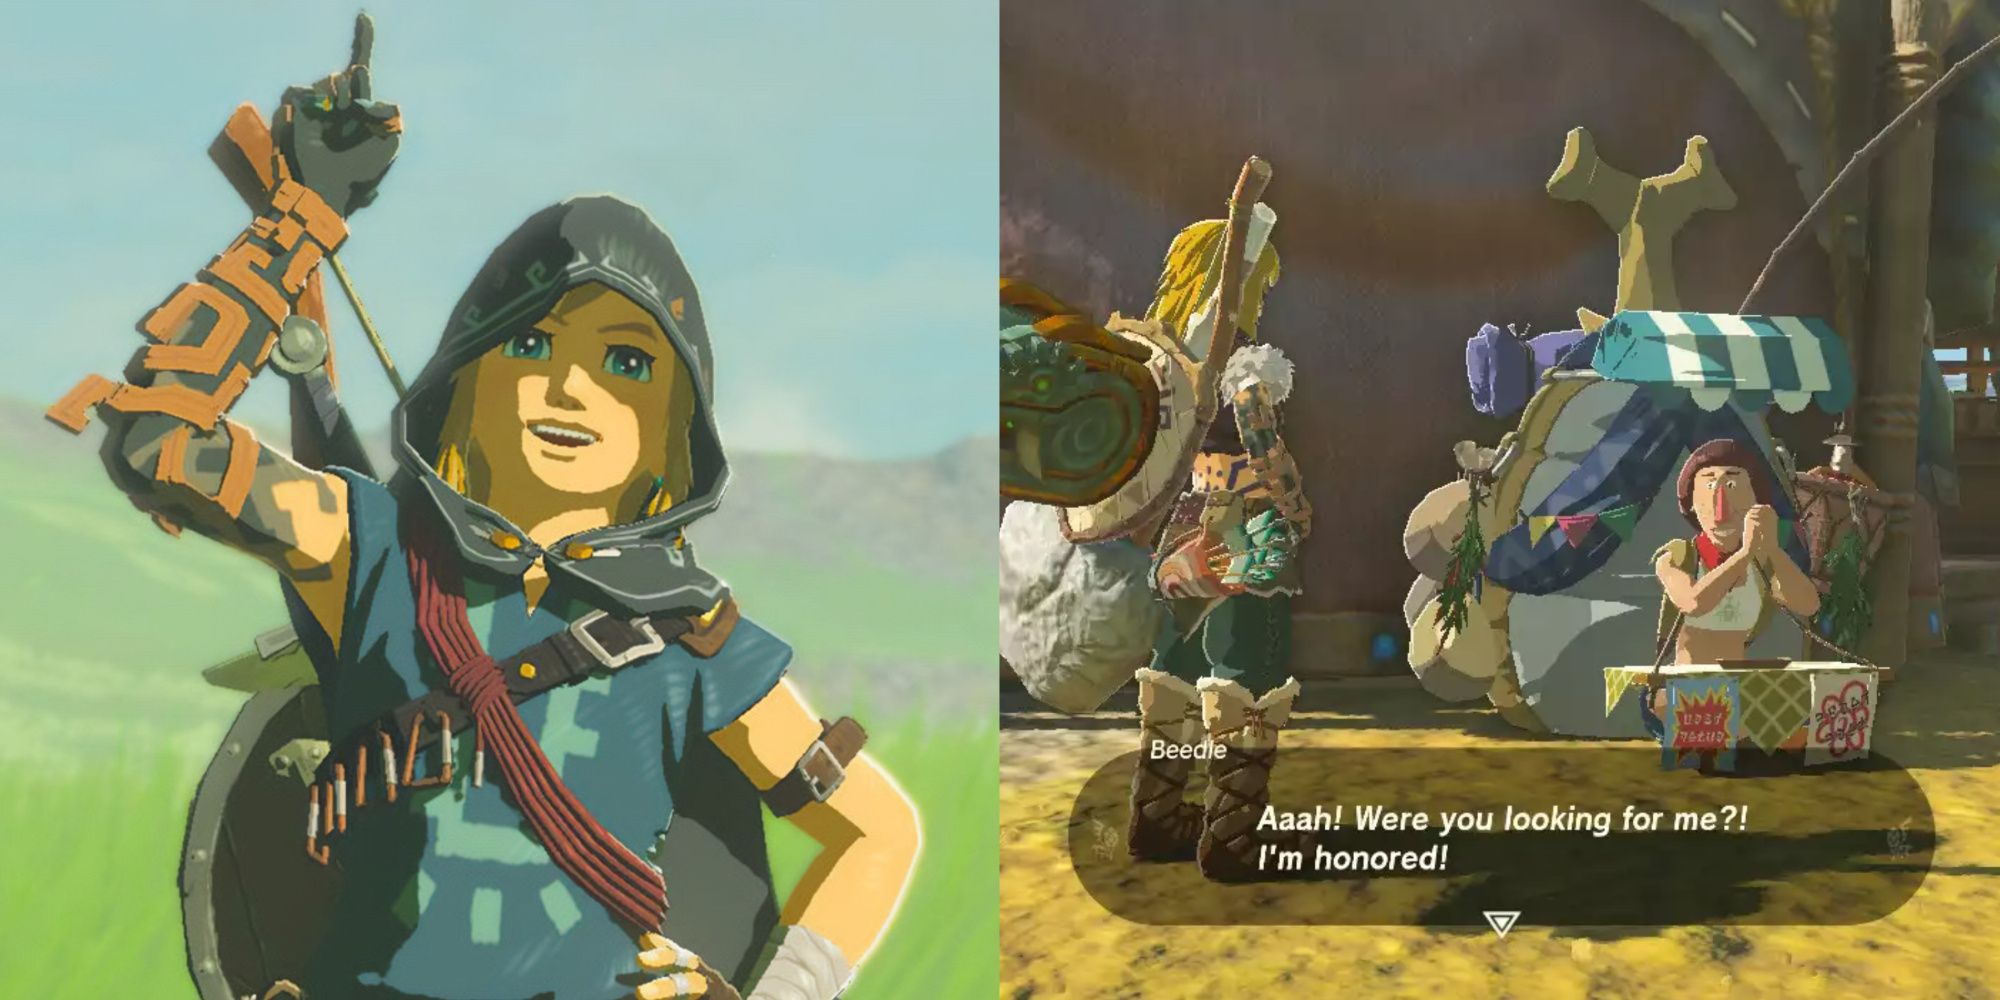 Link posing, and speaking to Beedle in Tears of the Kingdom